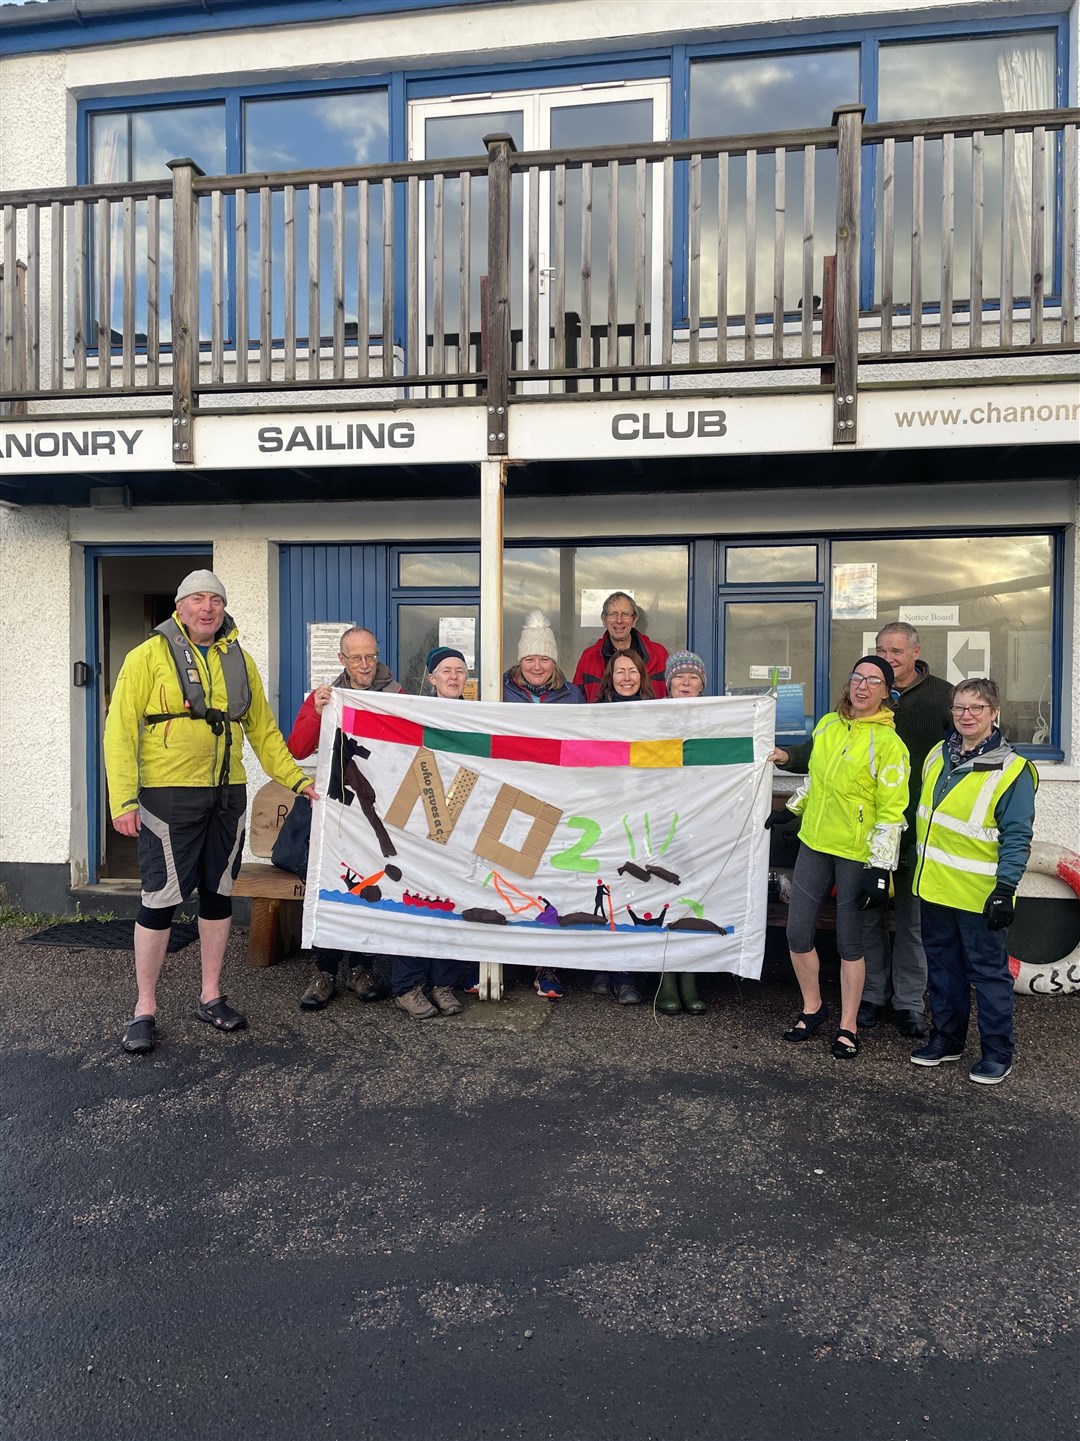 Chanonry Sailing Club joined the protest